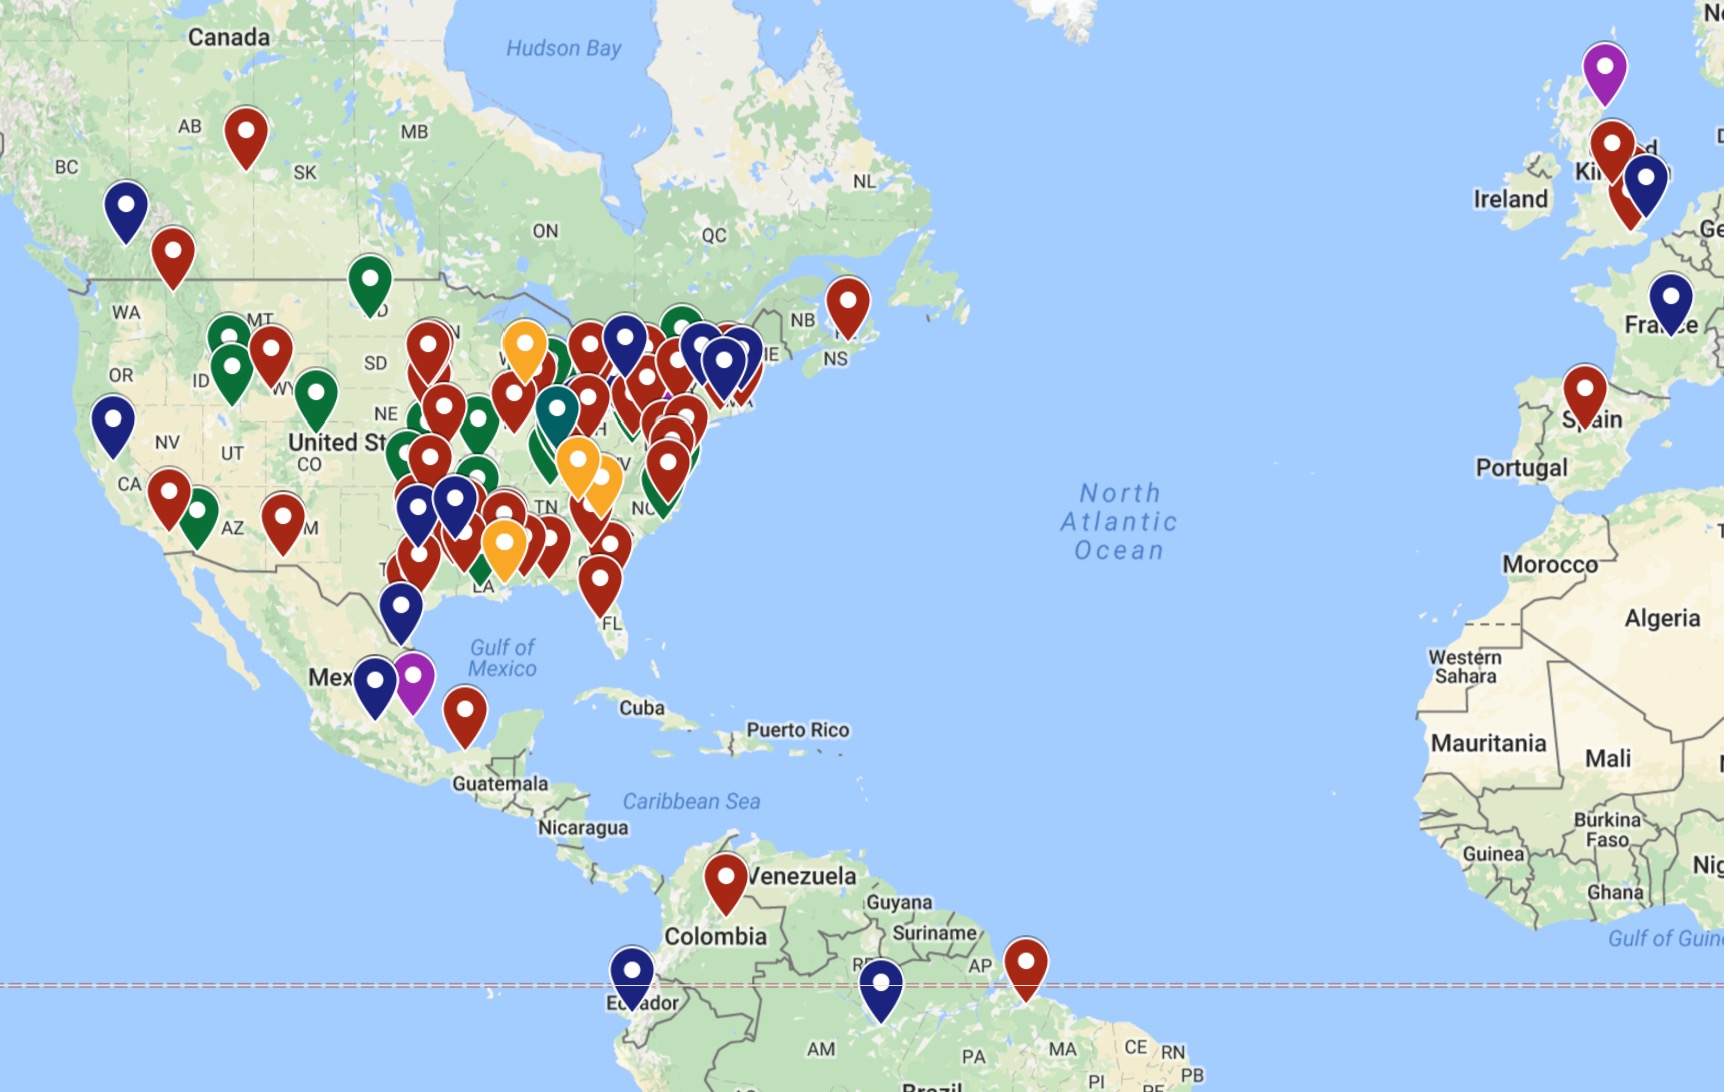 The IHG Point Breaks map and sortable table is updated ...